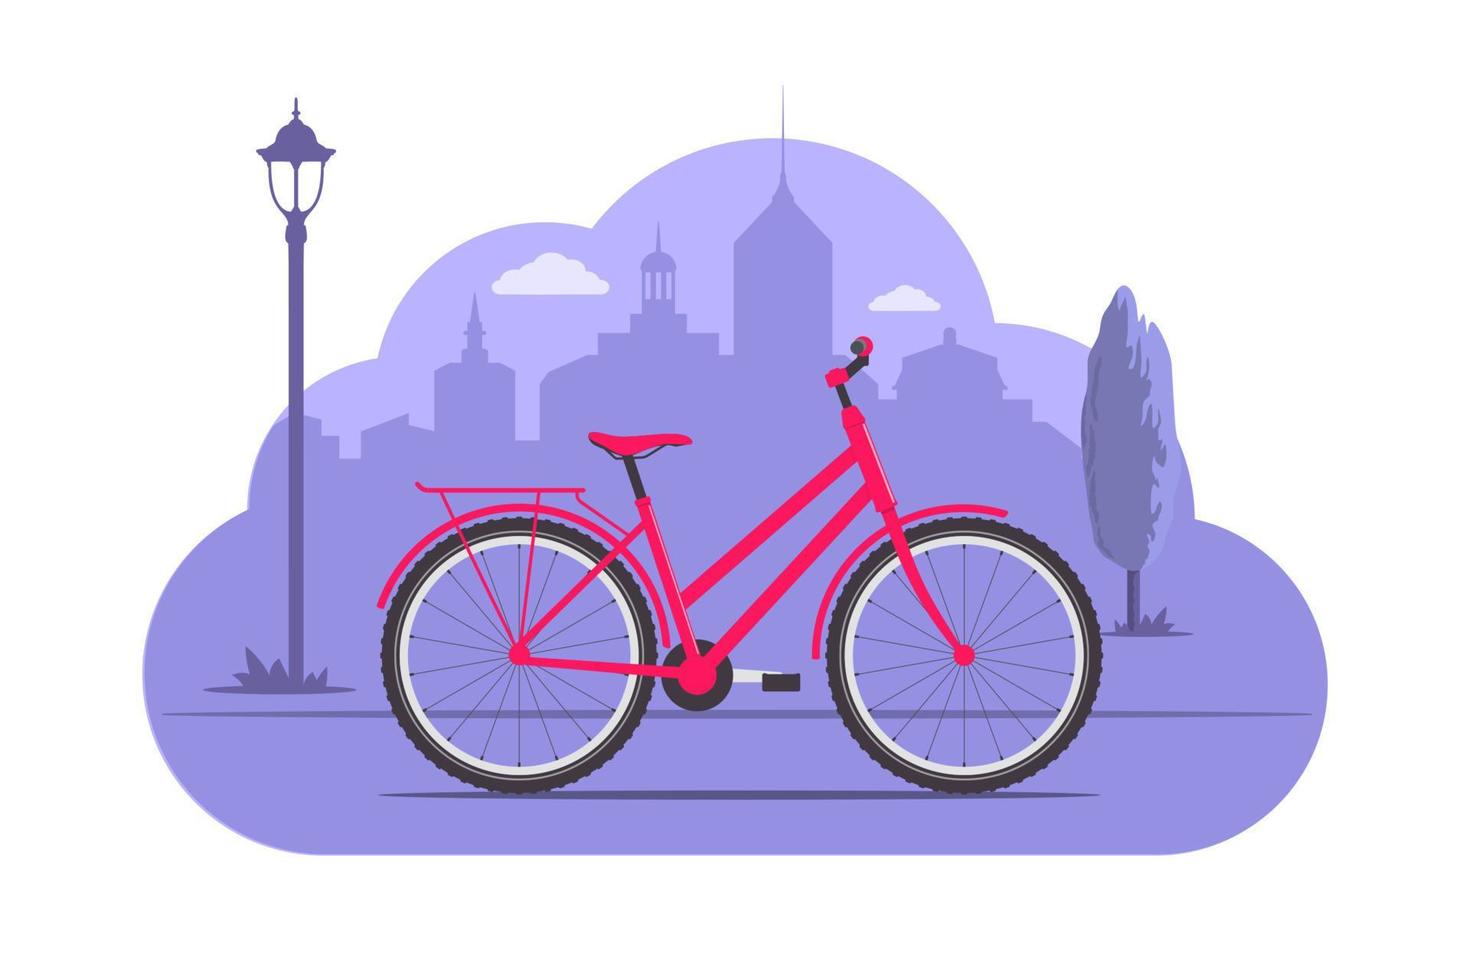 Cute bicycle on city silhouette background. Pink bicycle on purple monochrome background. Bike concept illustration for app or website. Modern transport. Flat style vector illustration.